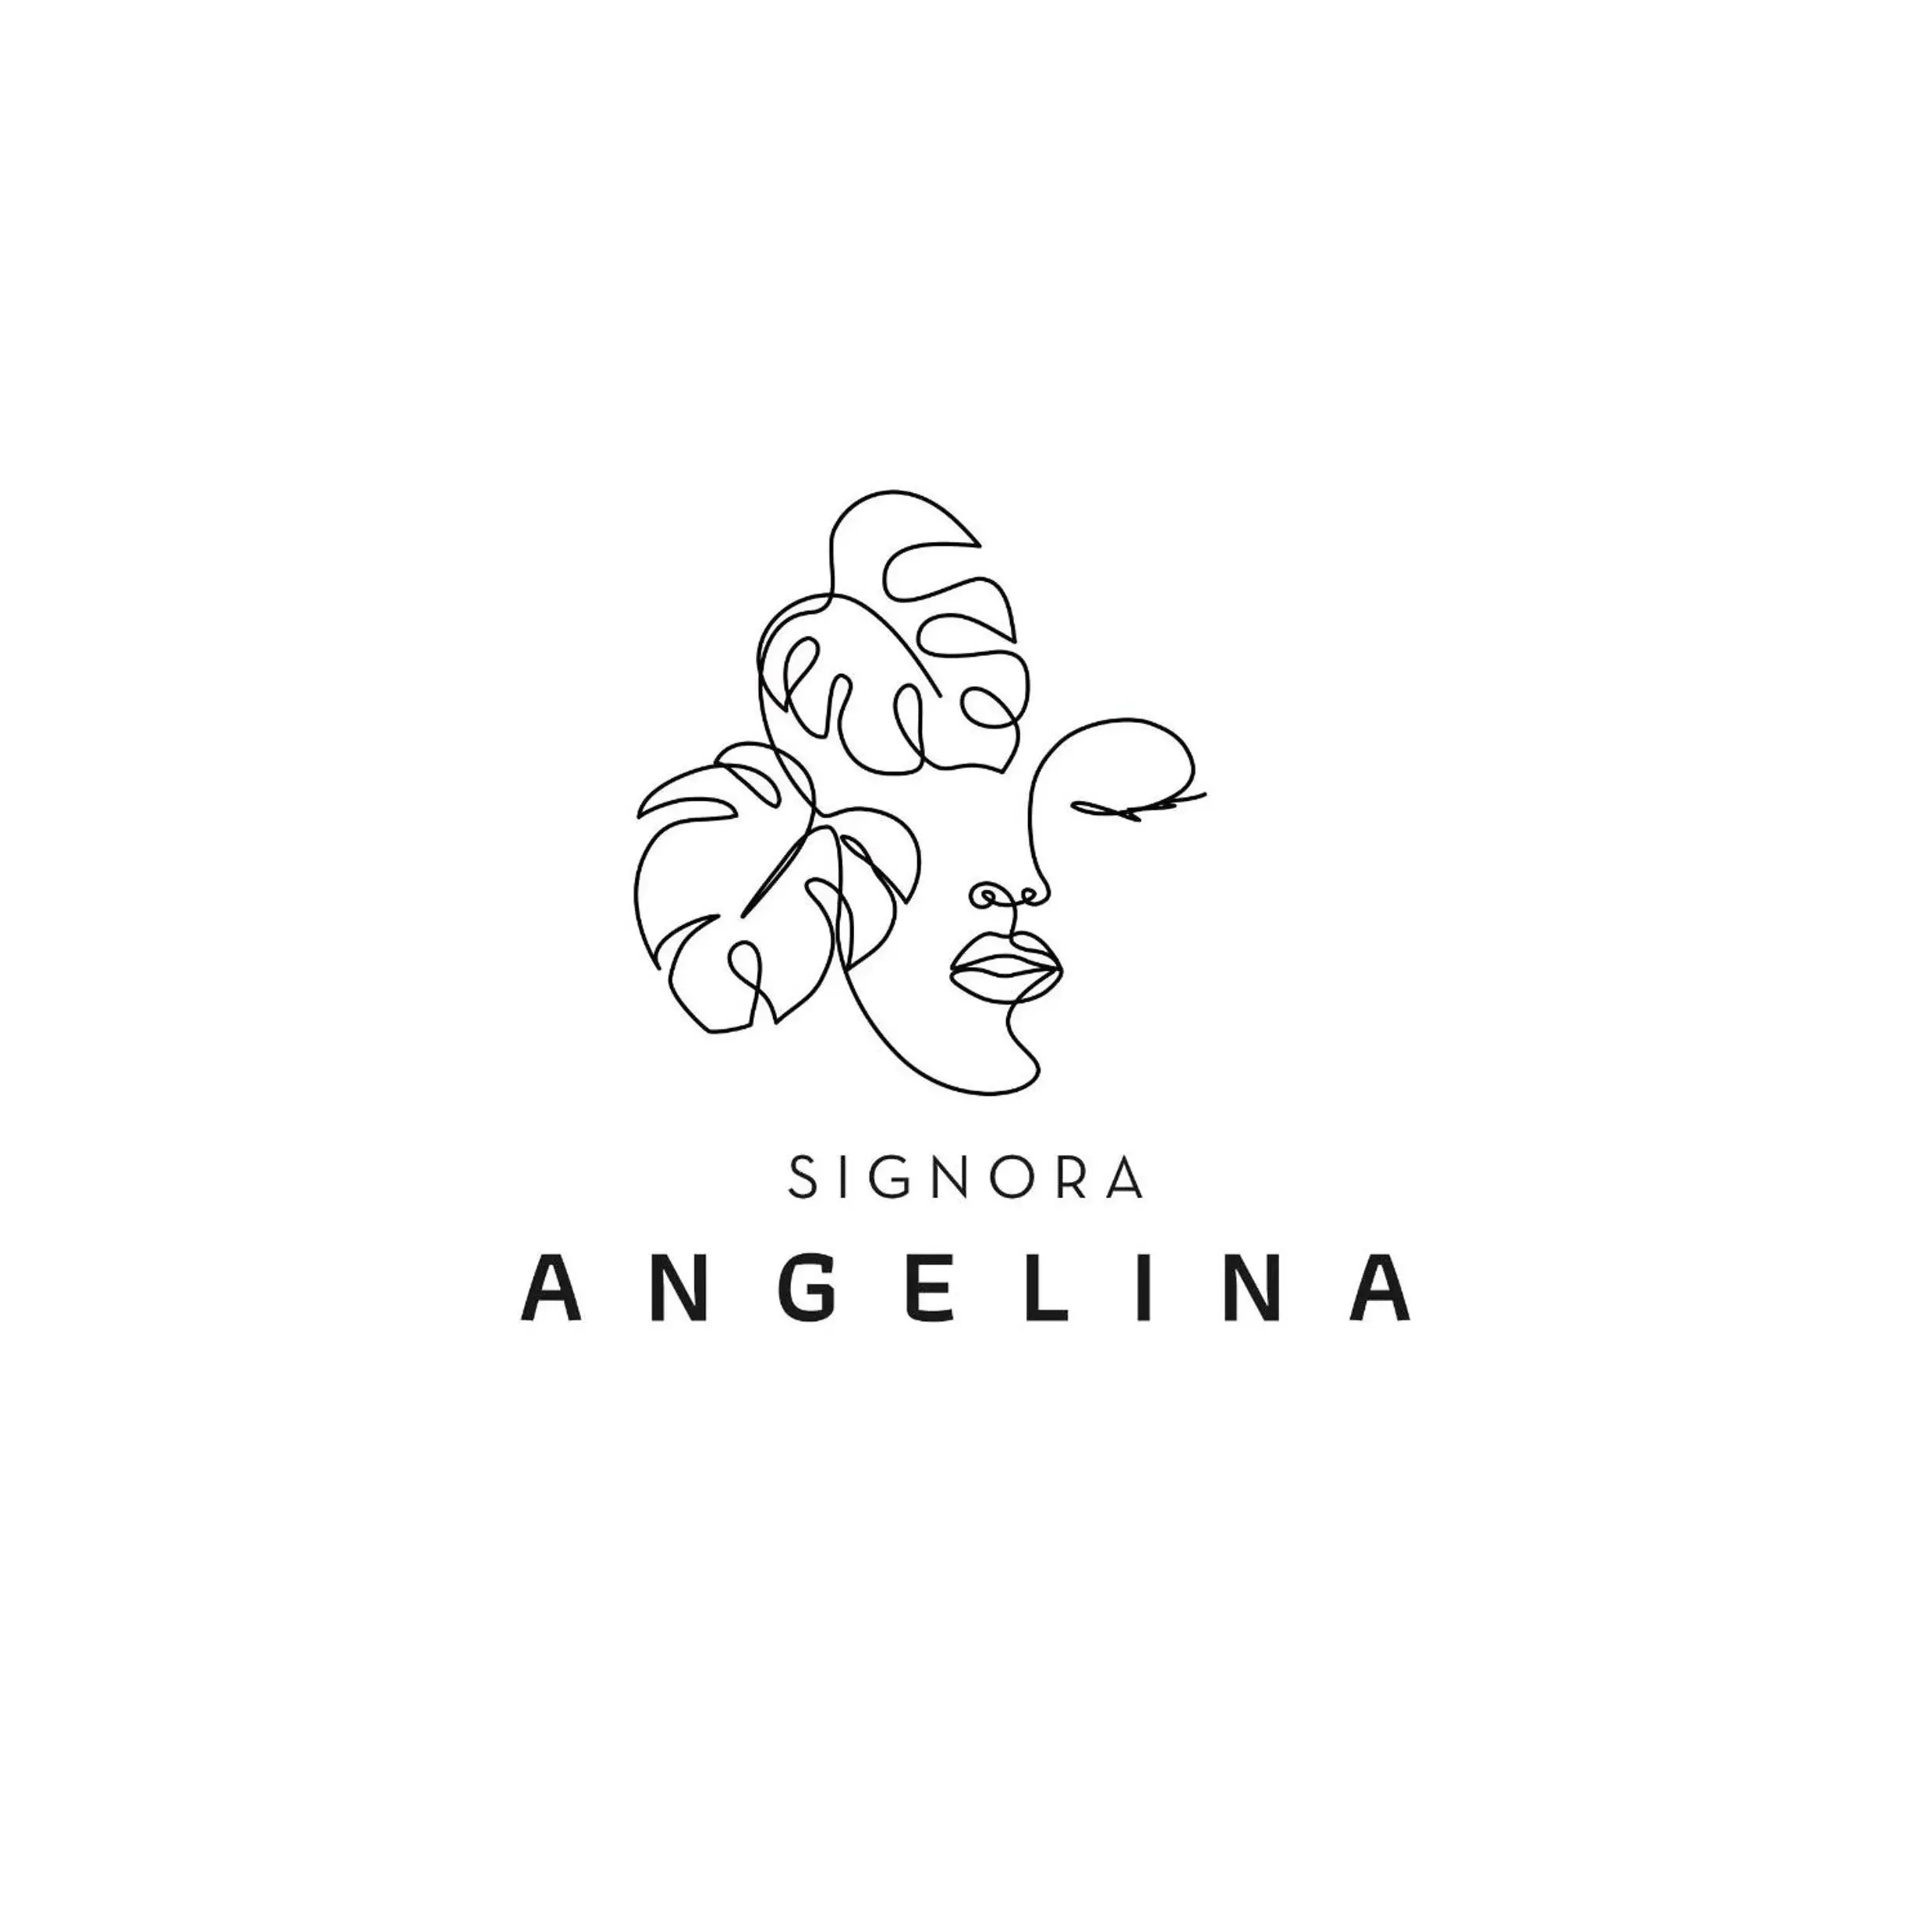 Property logo or sign in SIGNORA ANGELINA